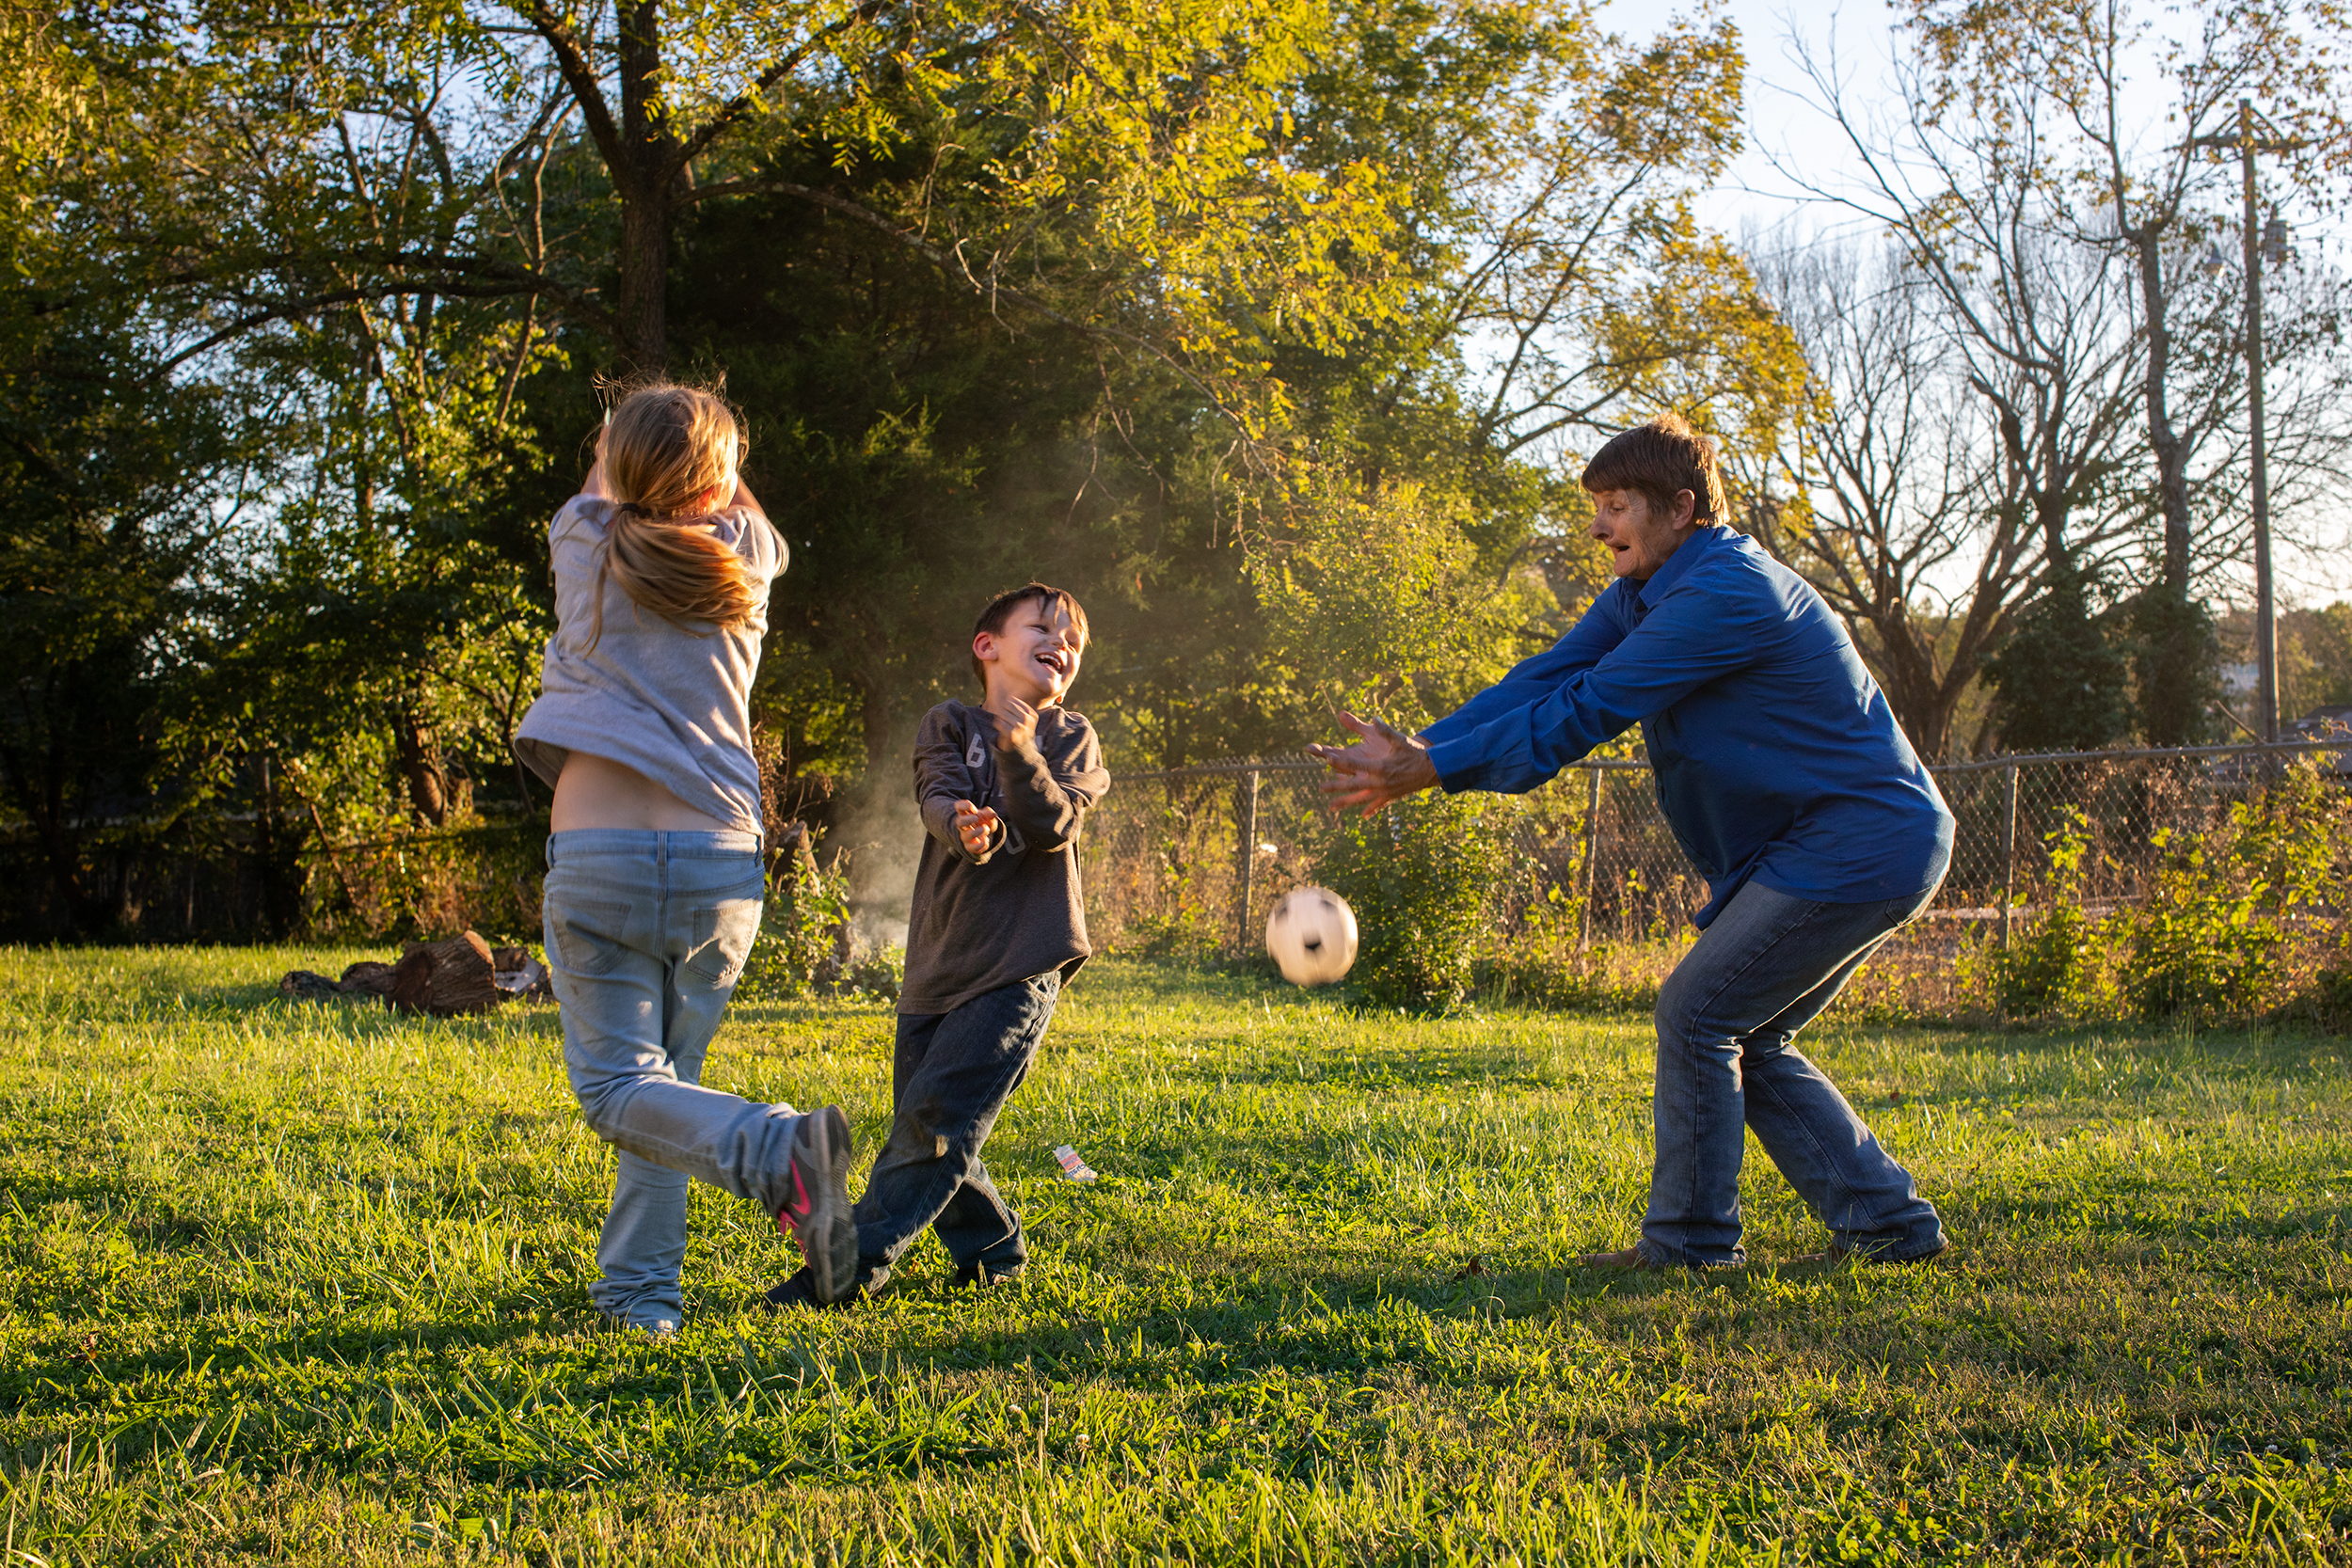  Brenda plays with her grandson, Jonathan, and her grandniece, Grace, in their yard in Mountain Grove, Mo. 